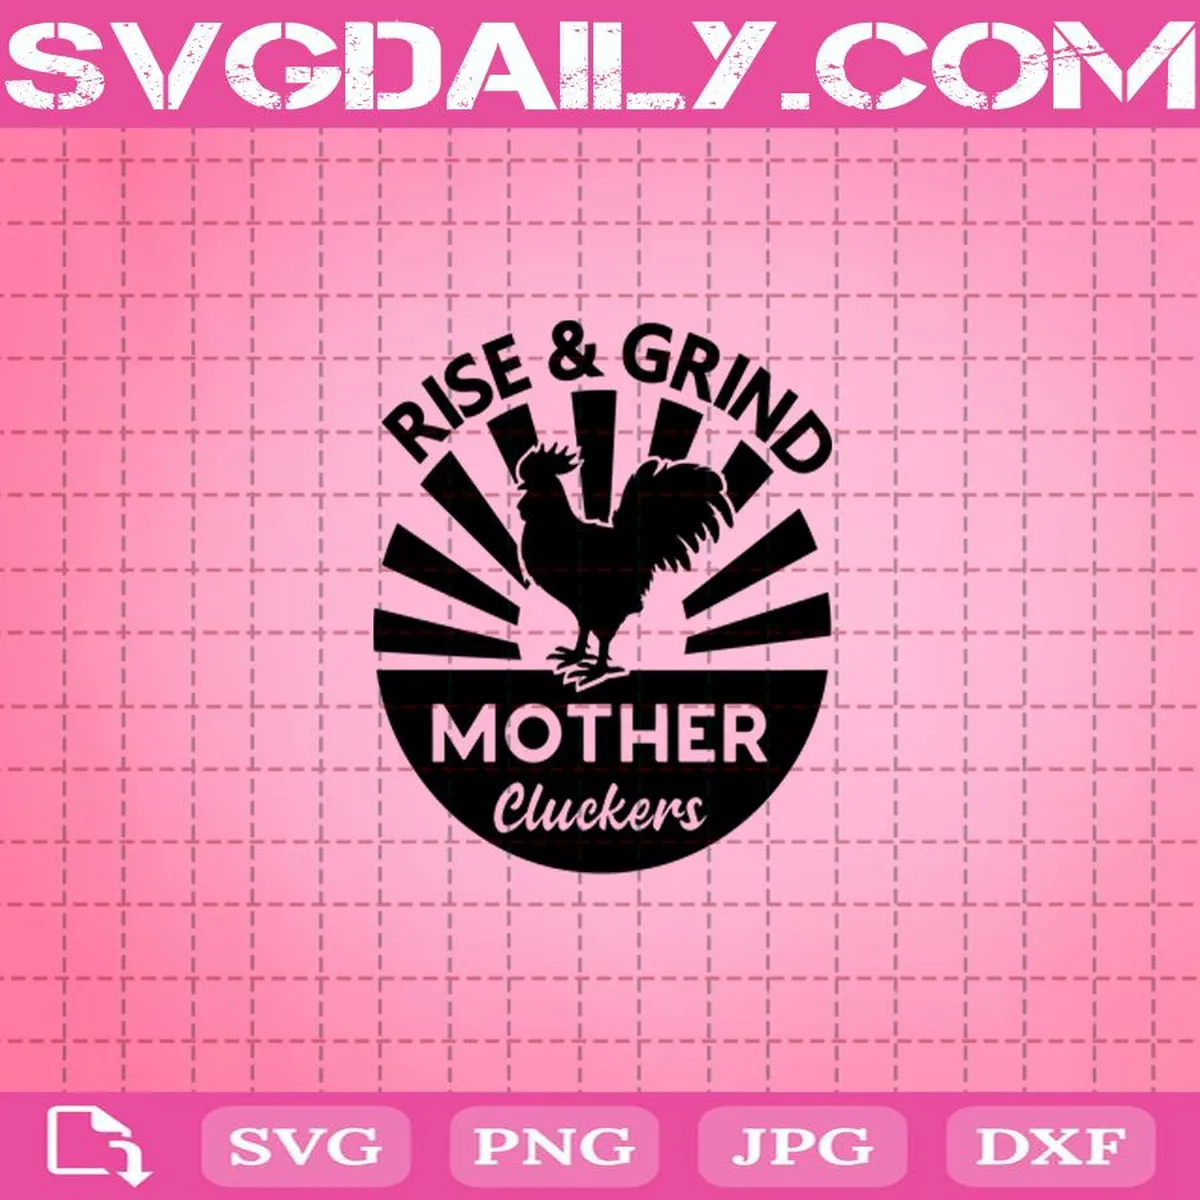 Rooster Rise And Shine Mother Cluckers Svg, Rooster Svg, Mother Cluckers Svg, Chicken Svg, Rise And Shine Svg, Funny Chicken Svg